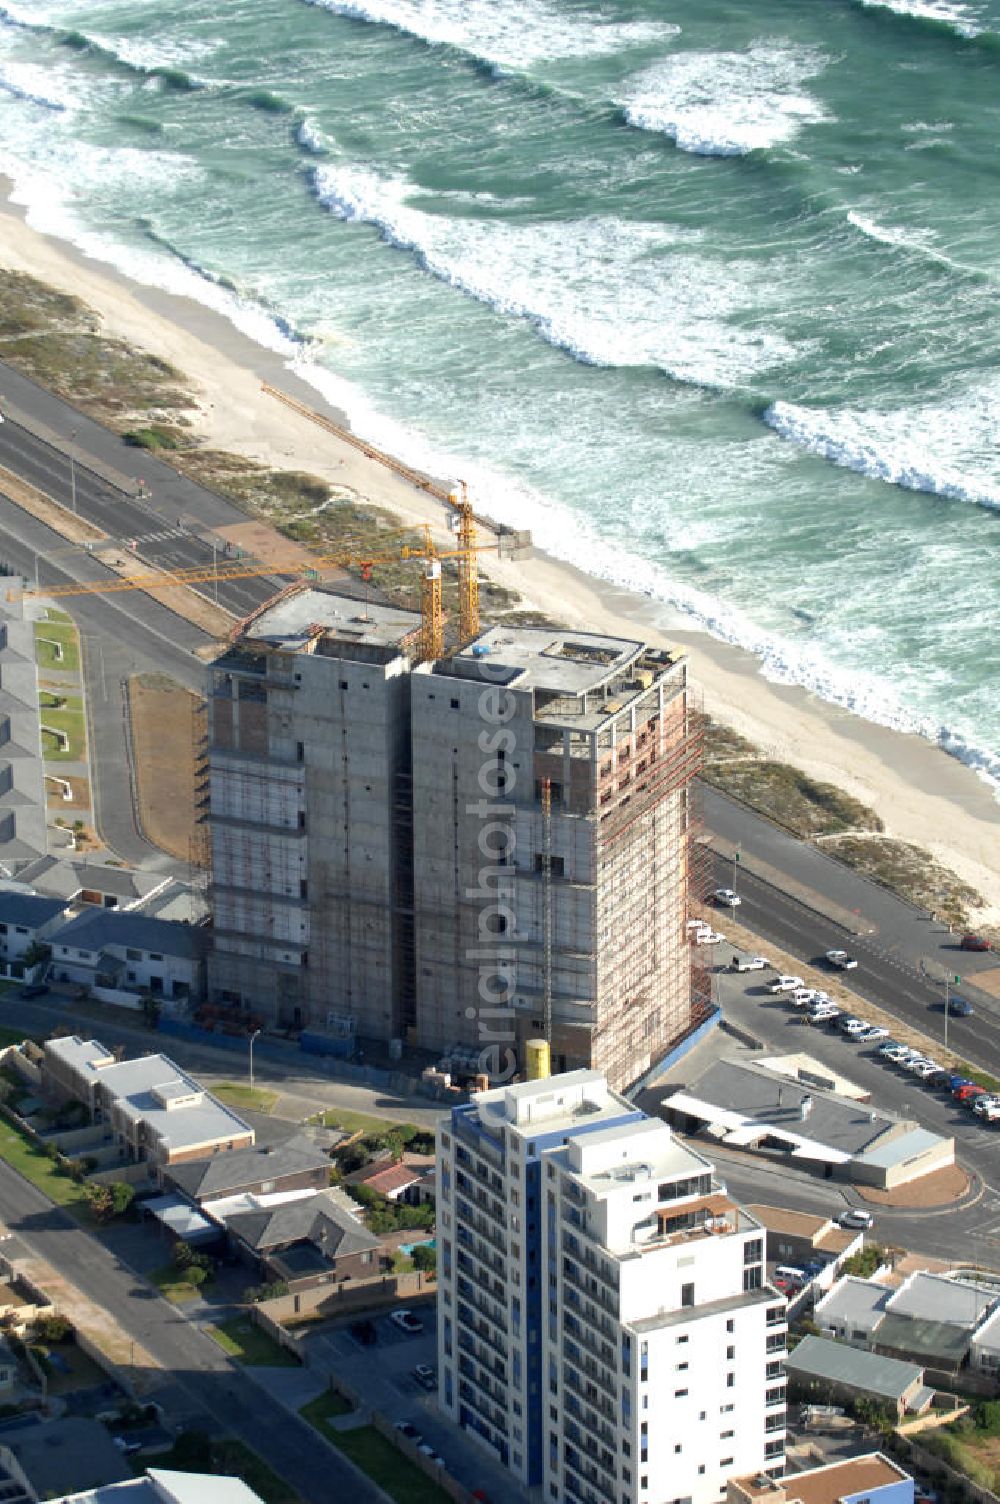 Kapstadt from the bird's eye view: Construction site in the residental area on Blouberg Beach in Cape Town, South Africa